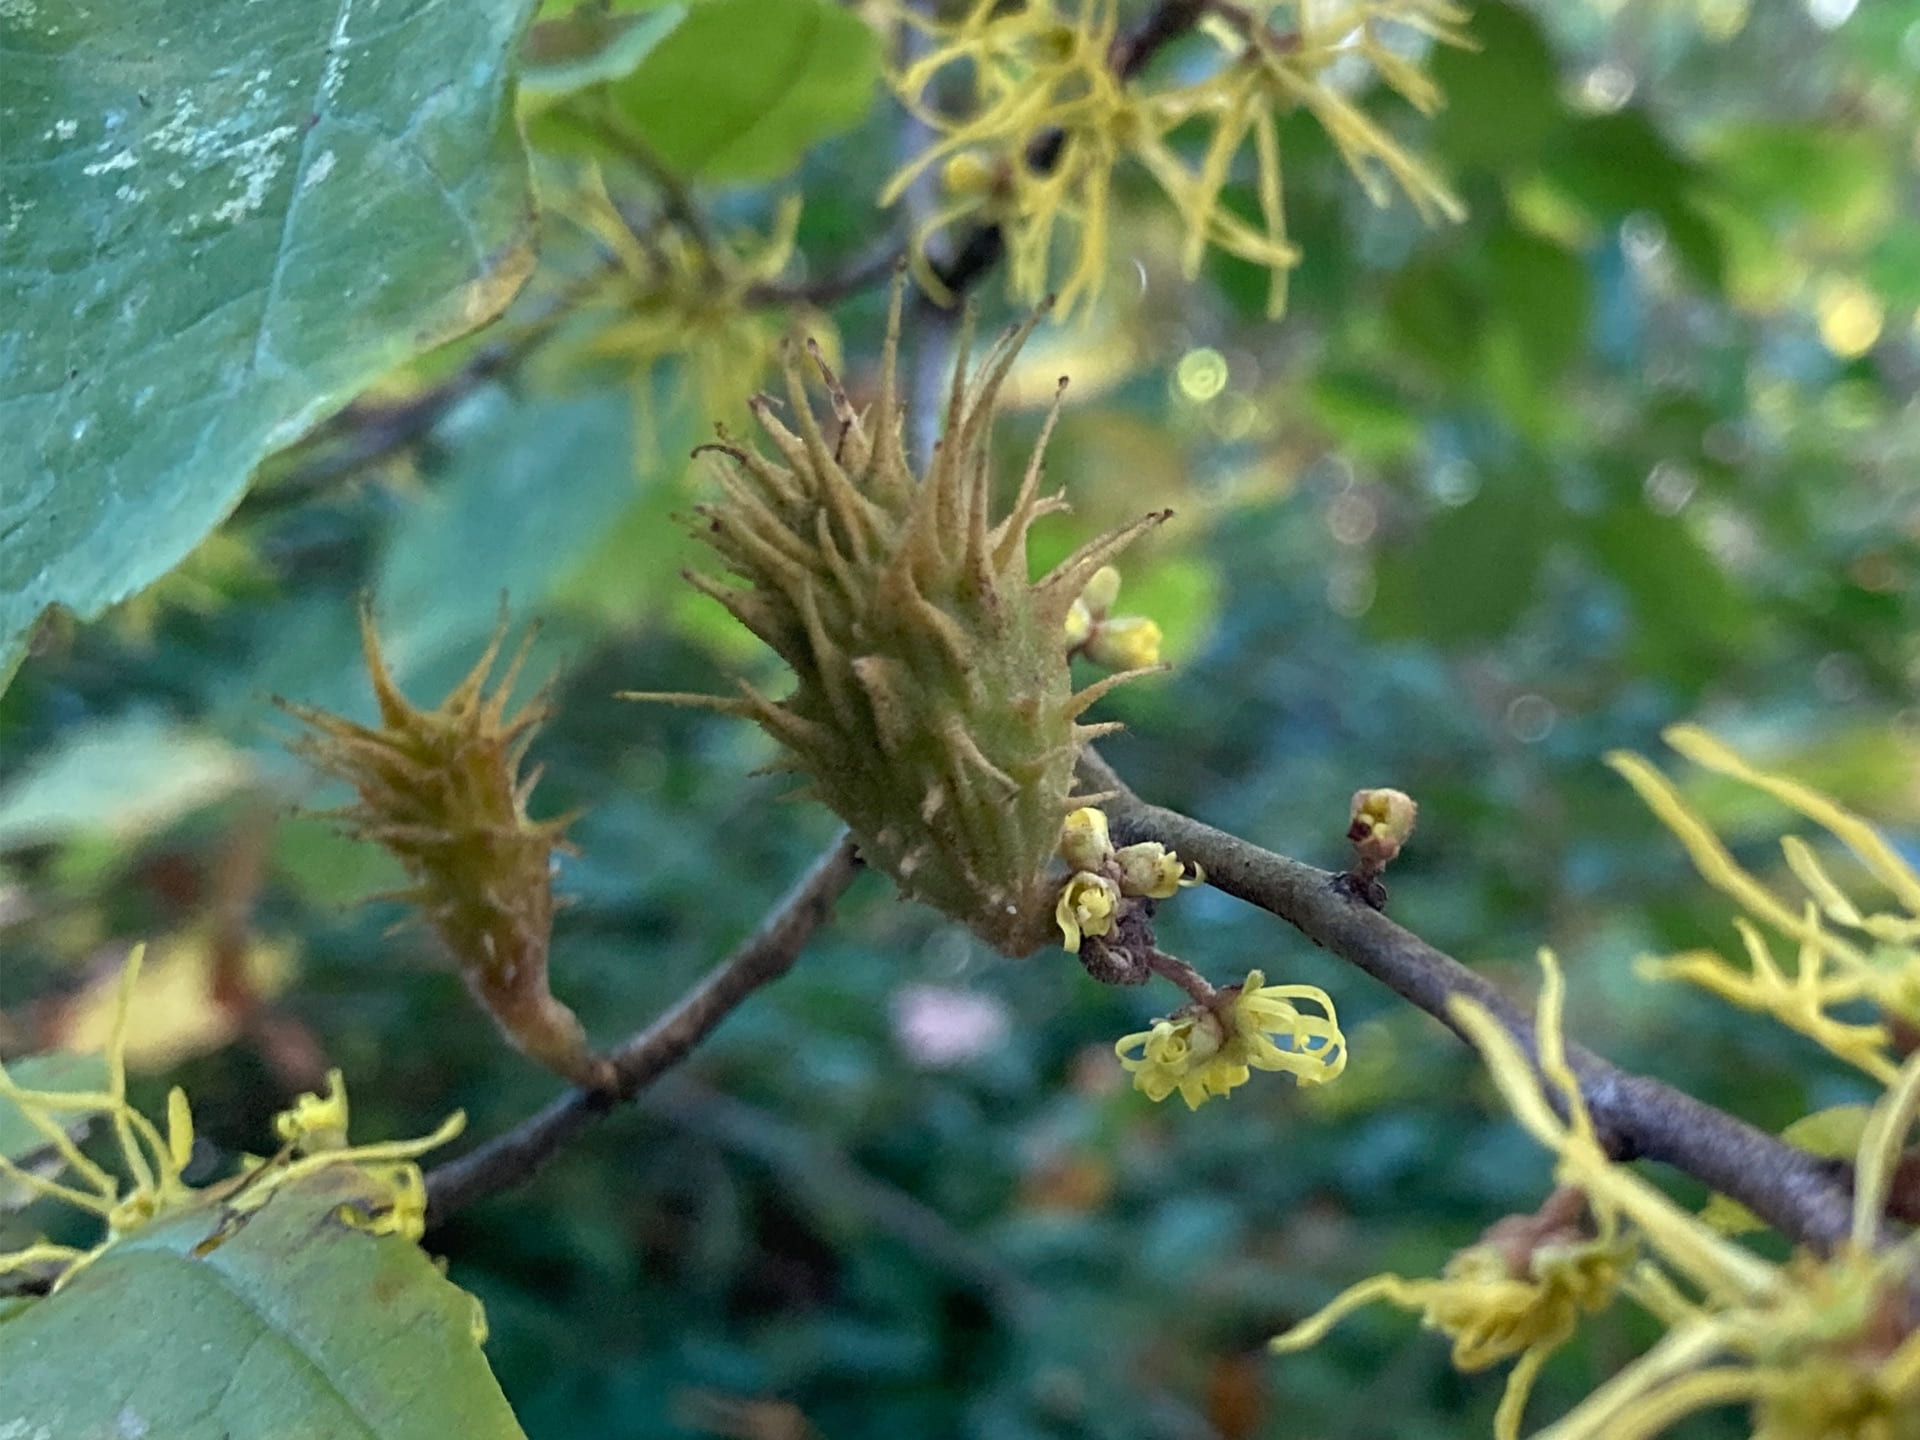 The spiny witchhazel gall aphid, Hamamelistes spinosus, is an insect that can be found on river birch and witch hazel. Insects that create galls typically do not harm plants.